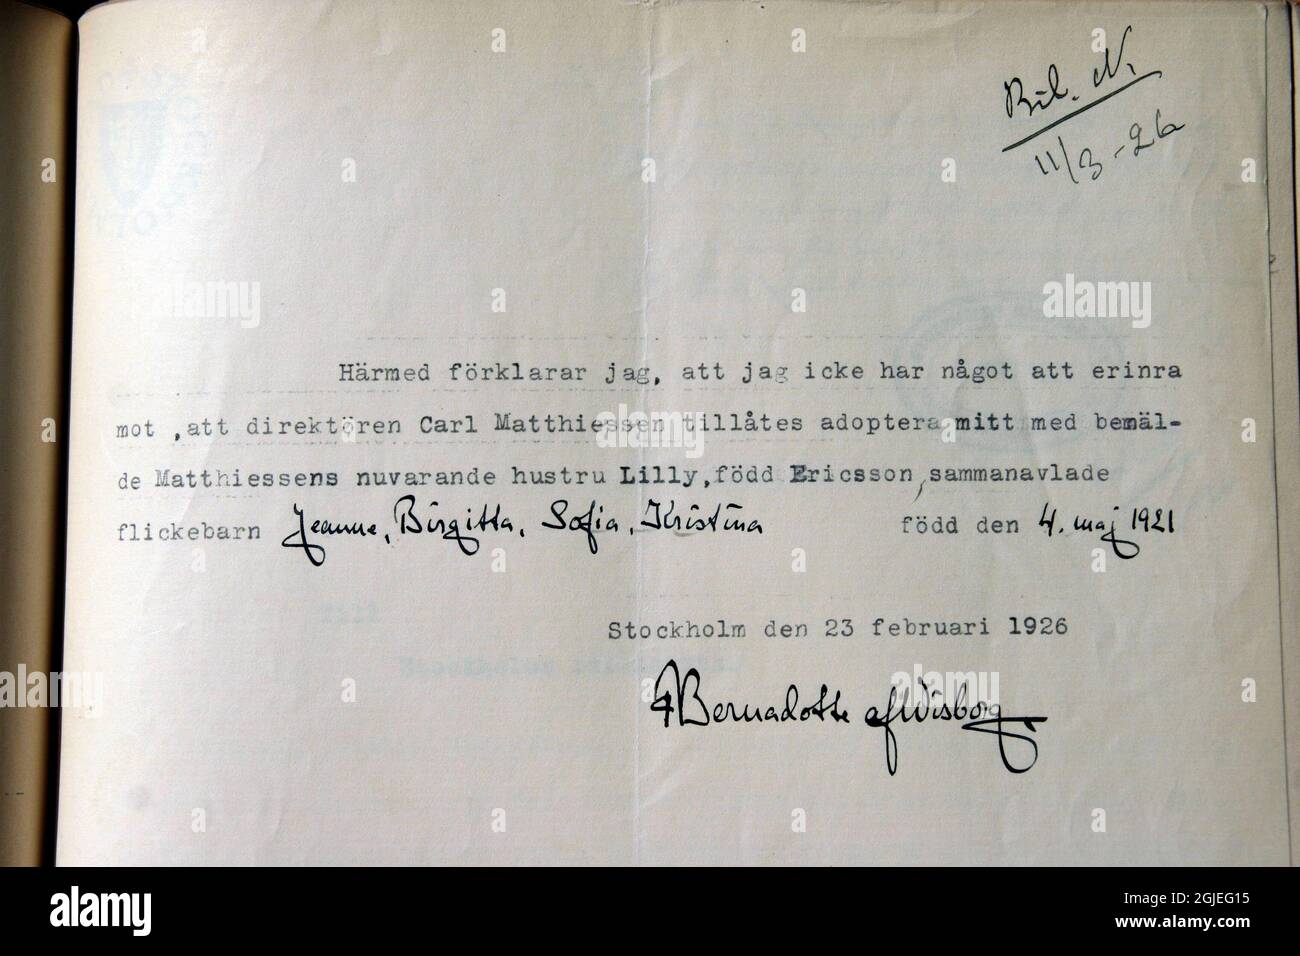 The document with Count Folke Bernadotte signature where he agreed for his daughter to be adopted by another man in Stockholm, Sweden in the 1920's.  An unknown child of Count Folke Bernadotte, closely related to the Swedish Royal family, has been revealed 60 years after his death. Count Bernadotte helped prisoners, mostly Scandinavian Jews, from the Nazi concentration camps during the end of WWII. He also engaged in the Israeli/Palestine conflict and was assassinated by the Israeli separatist organization Stern, 60 years ago in September 17, 1948. In the 1920th Count Bernadotte fell in love w Stock Photo